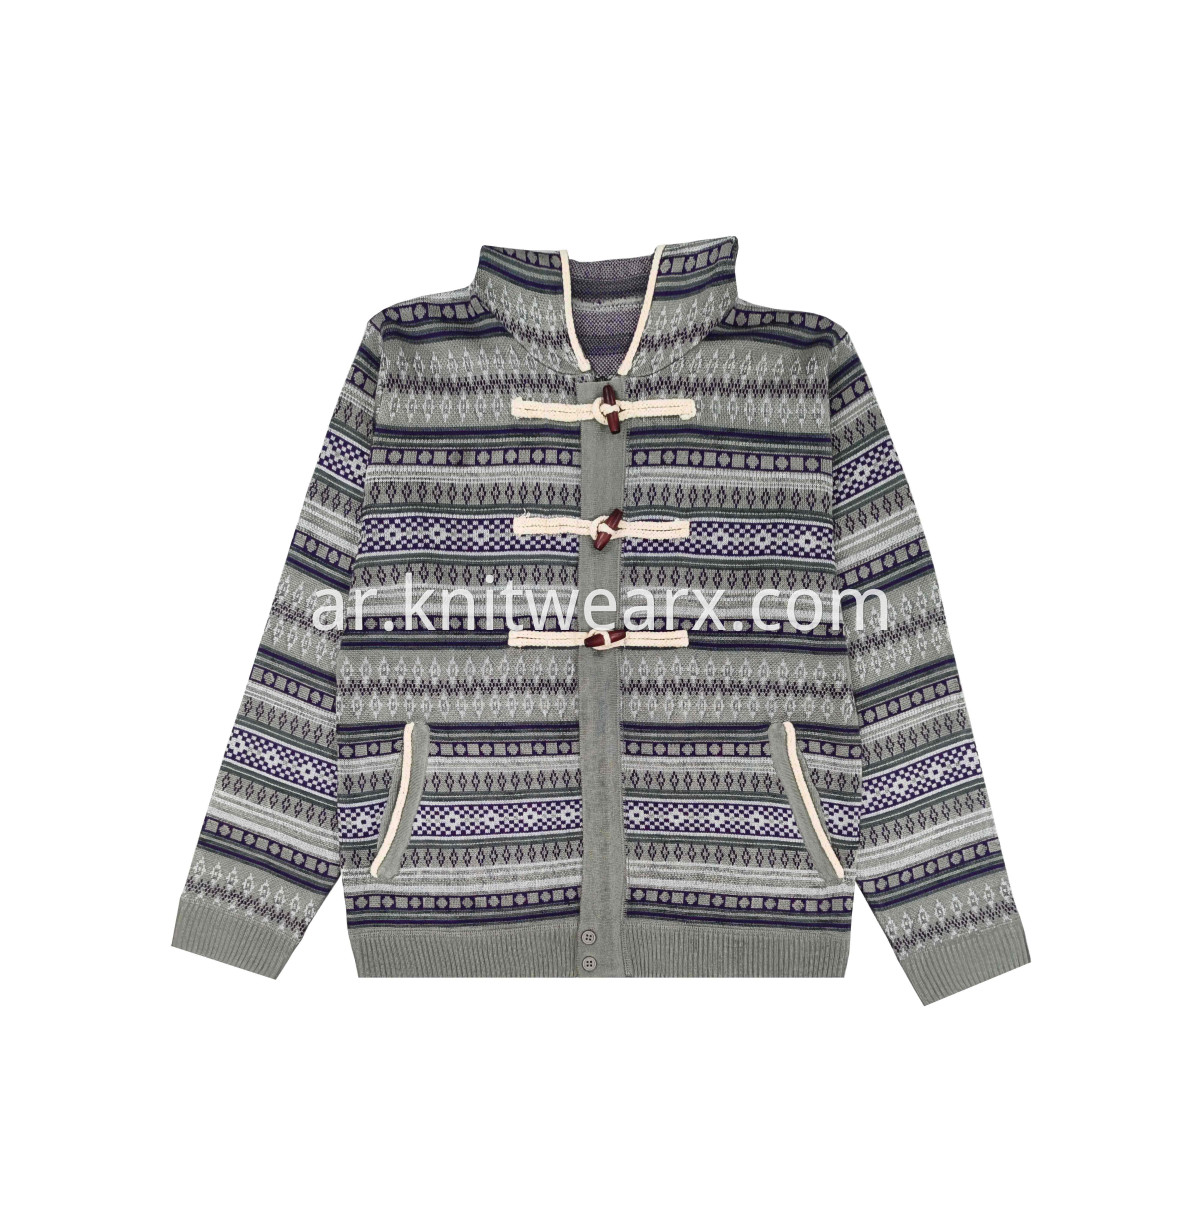 Men's Knitted Sweater Geometric Jacquard Full Zip Olive Button Hoodie